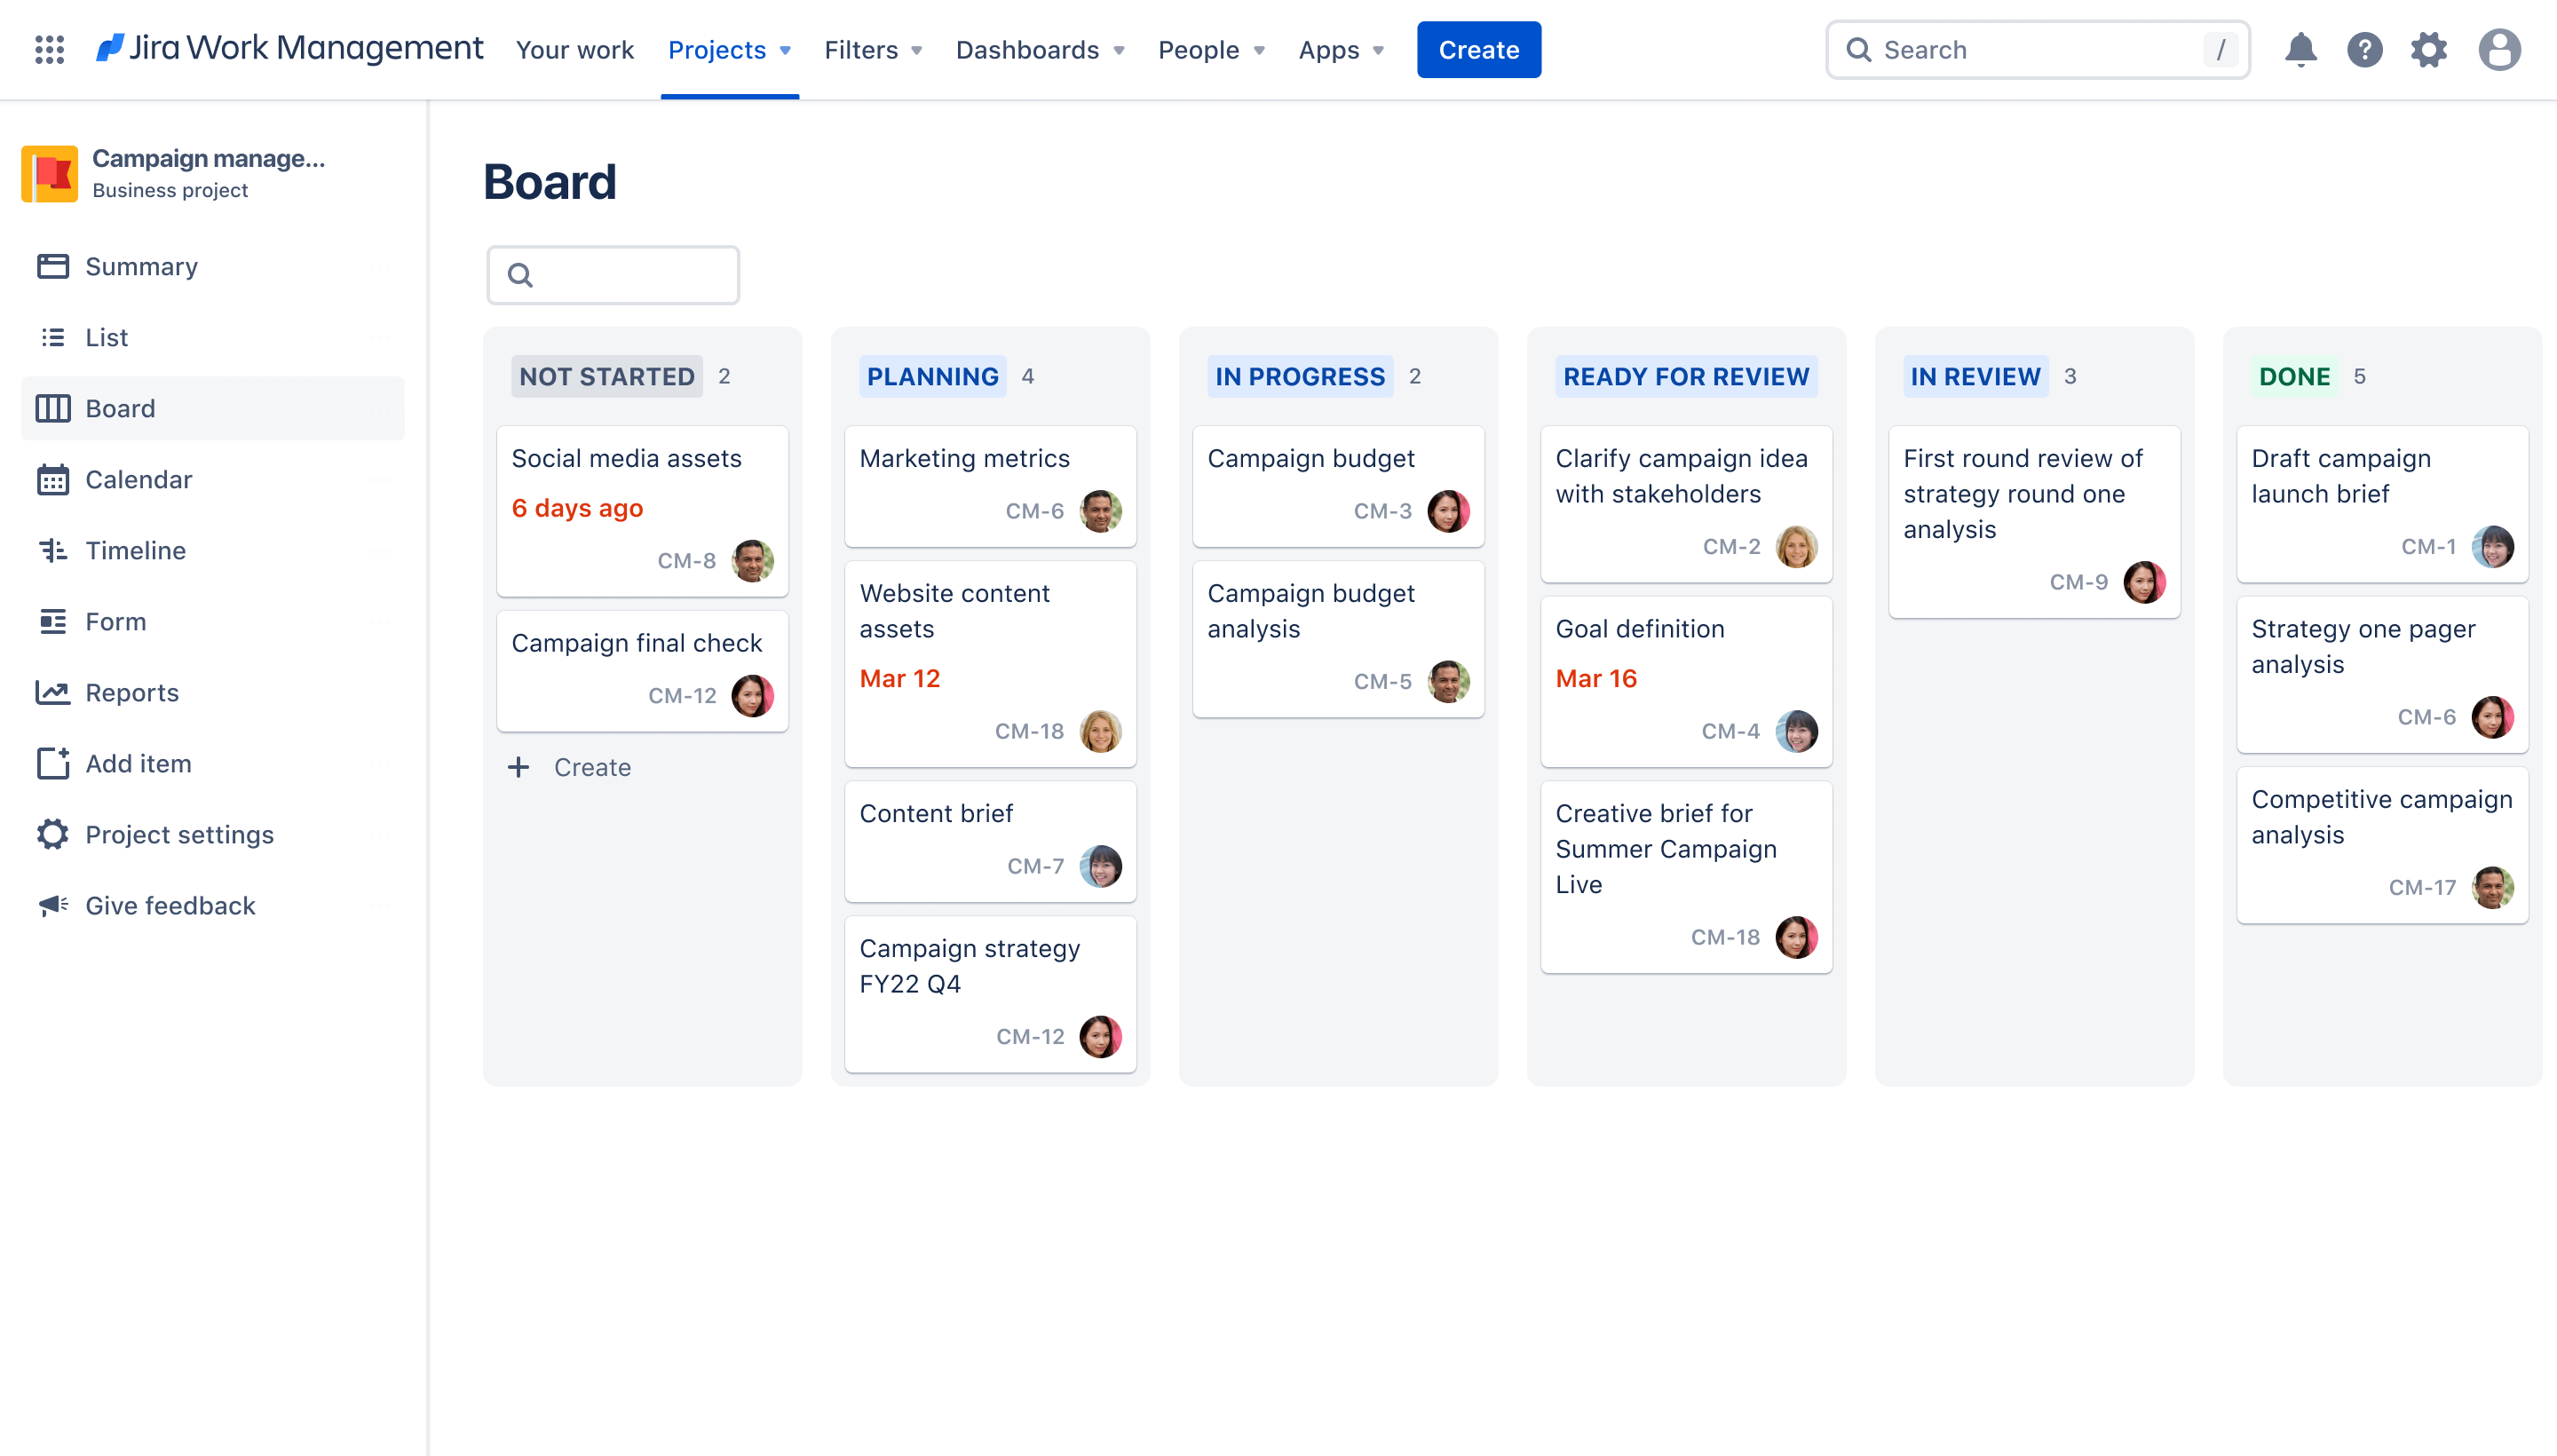 Campaign management board view in Jira WOrk management